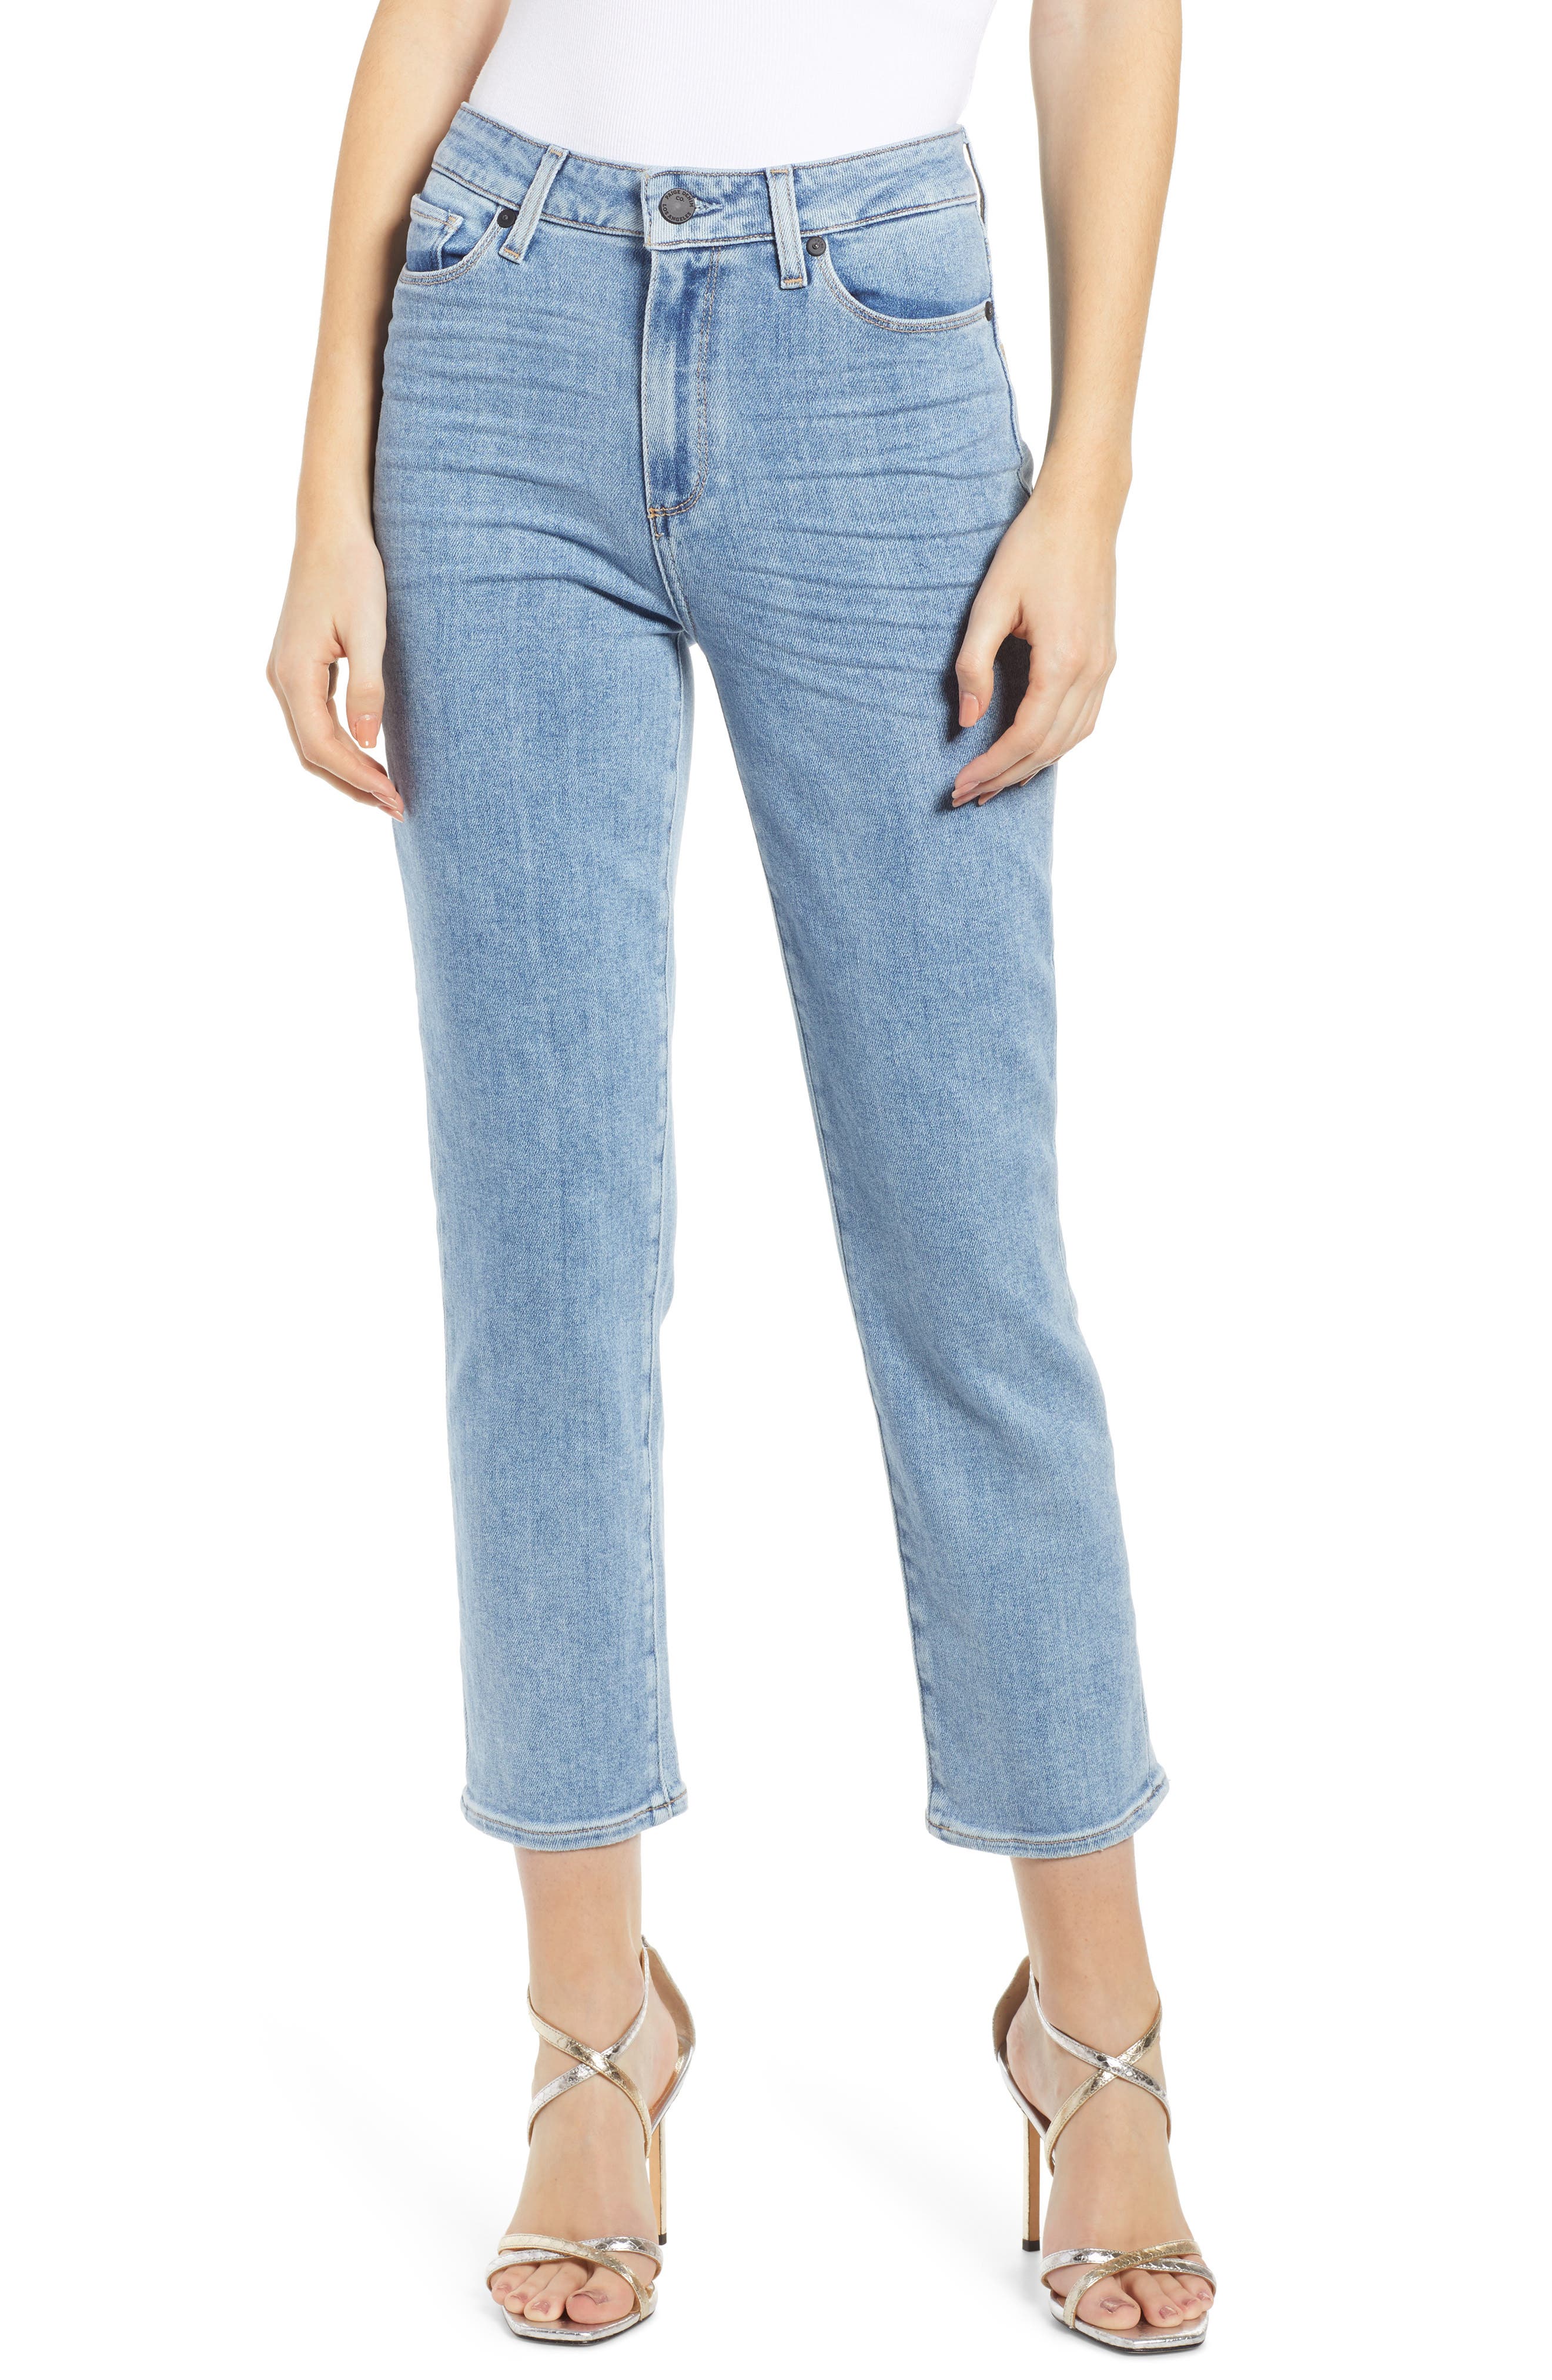 paige jeans hoxton straight